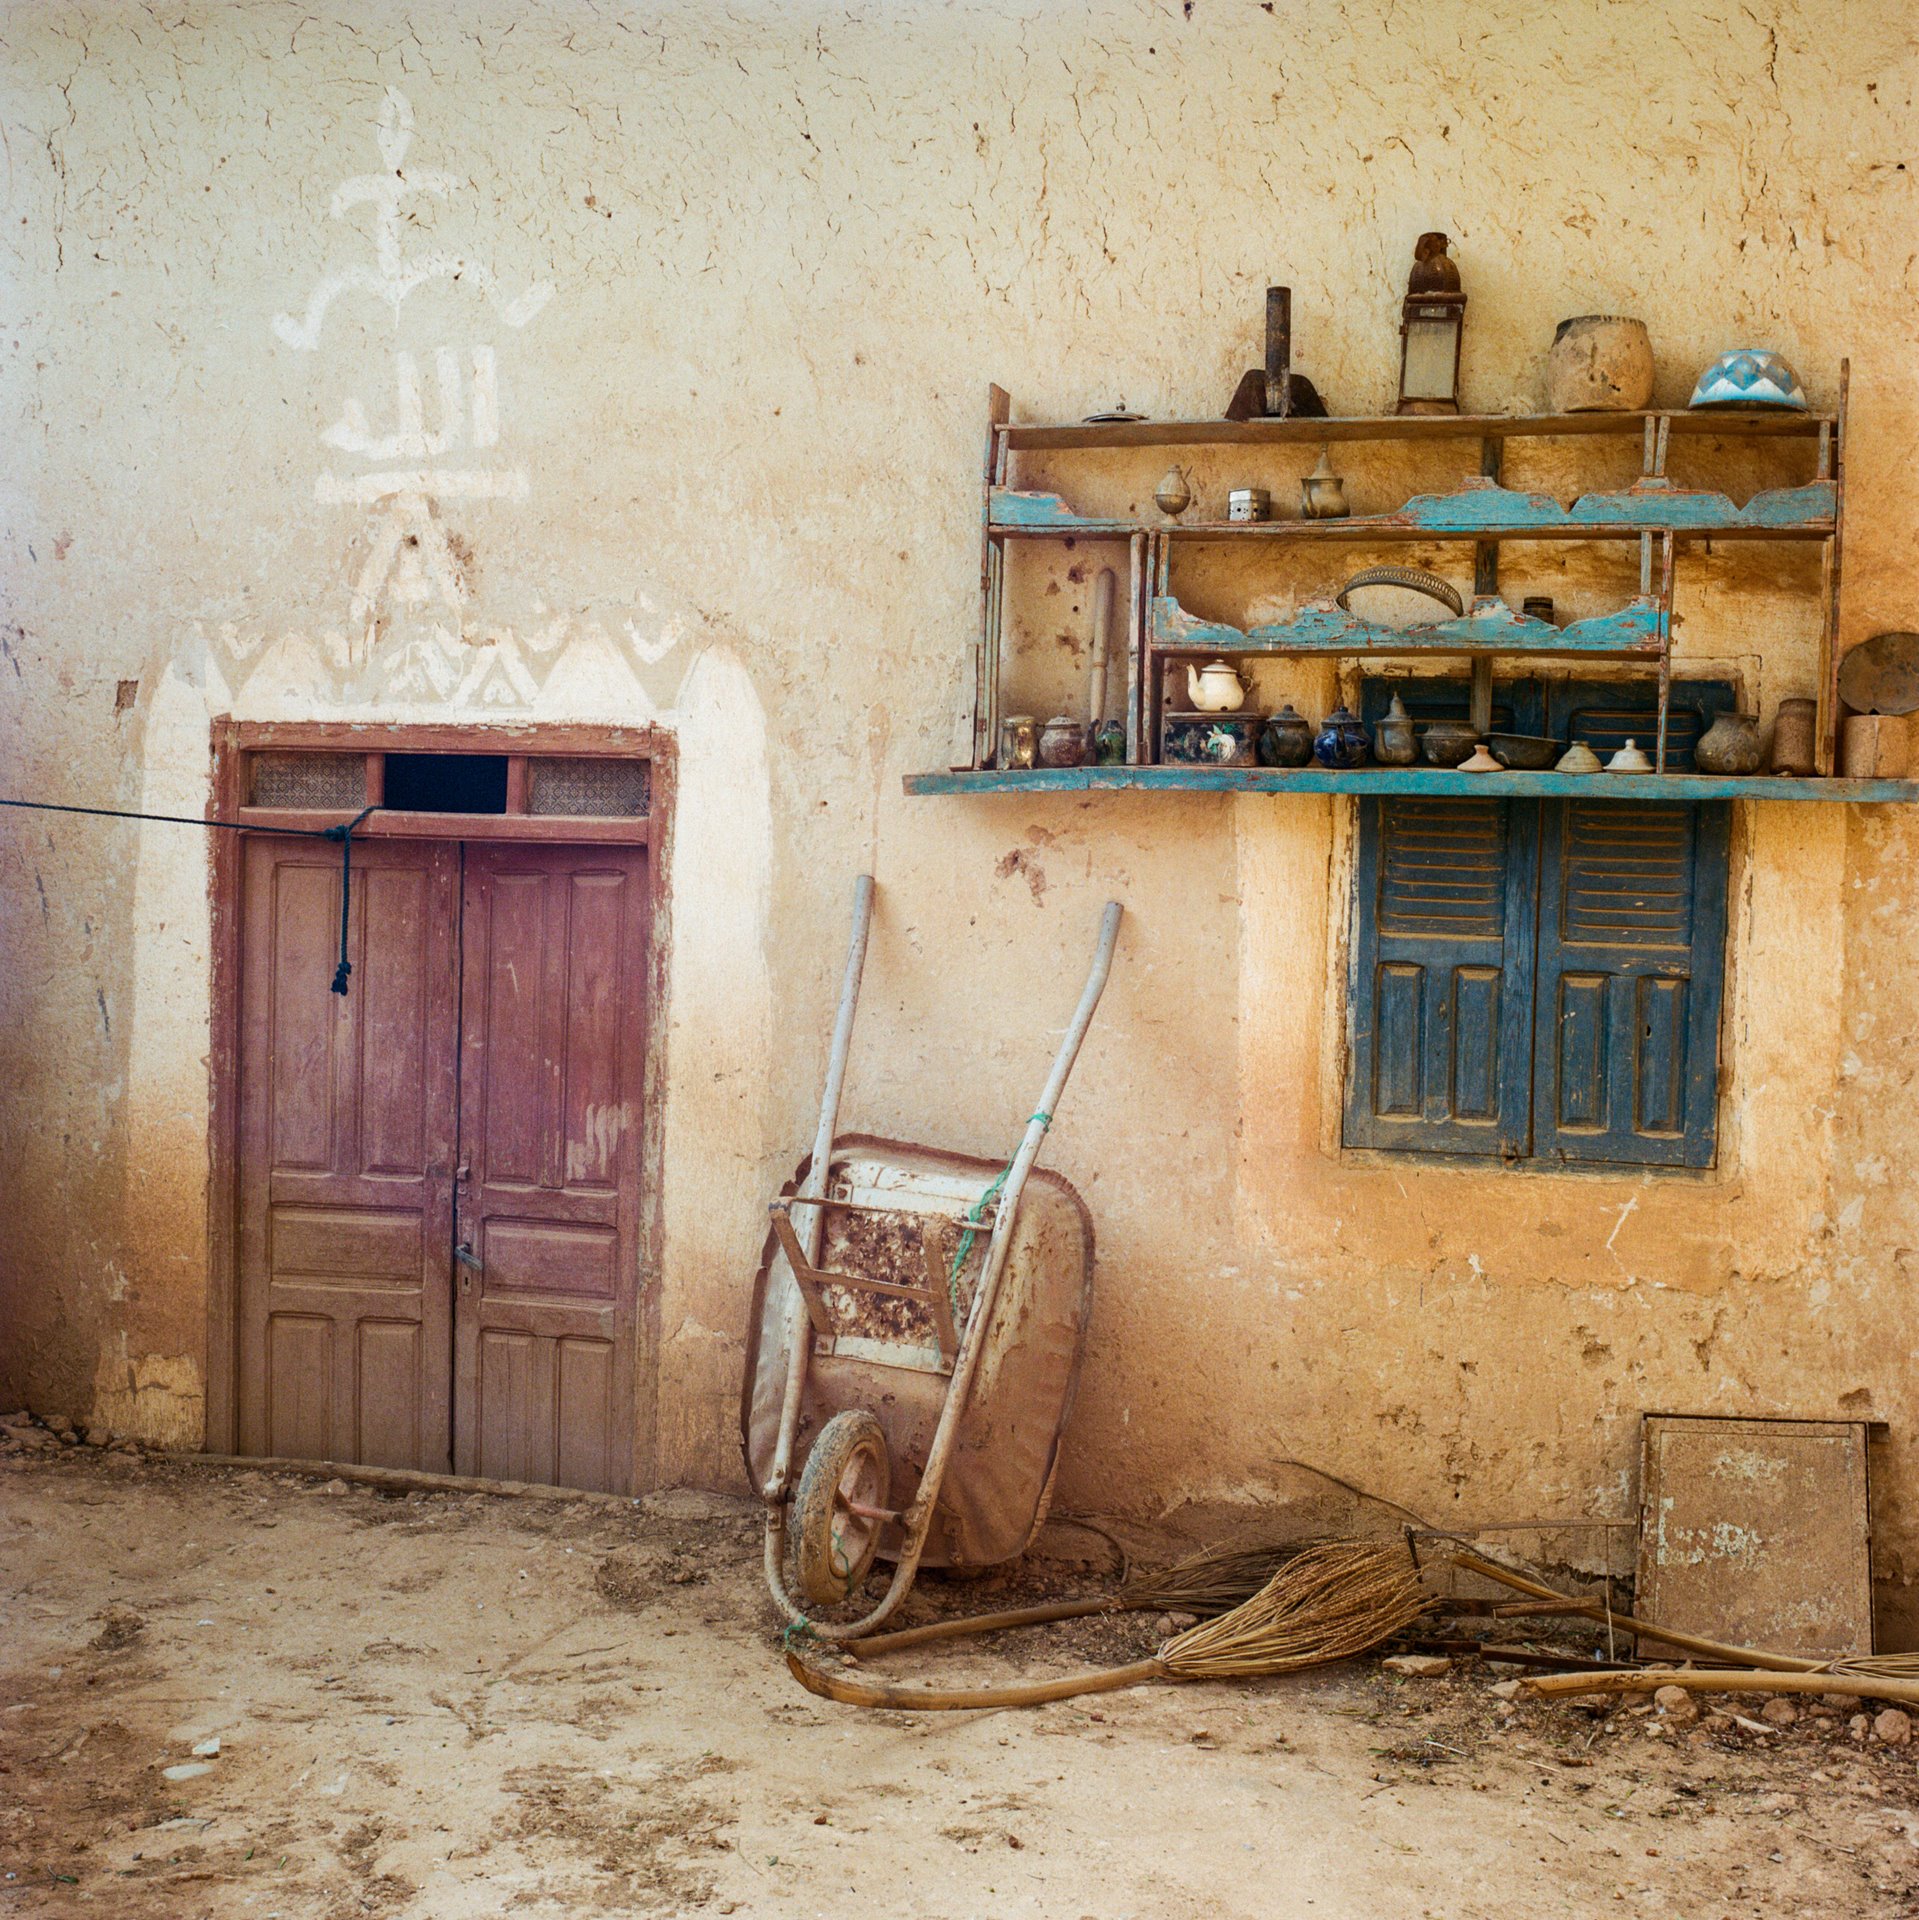 The courtyard of Habib Bilini&rsquo;s home in Tighmert Oasis, in southern Morocco. Bilini collects artifacts relating to nomadic culture, and has opened his house as a museum.